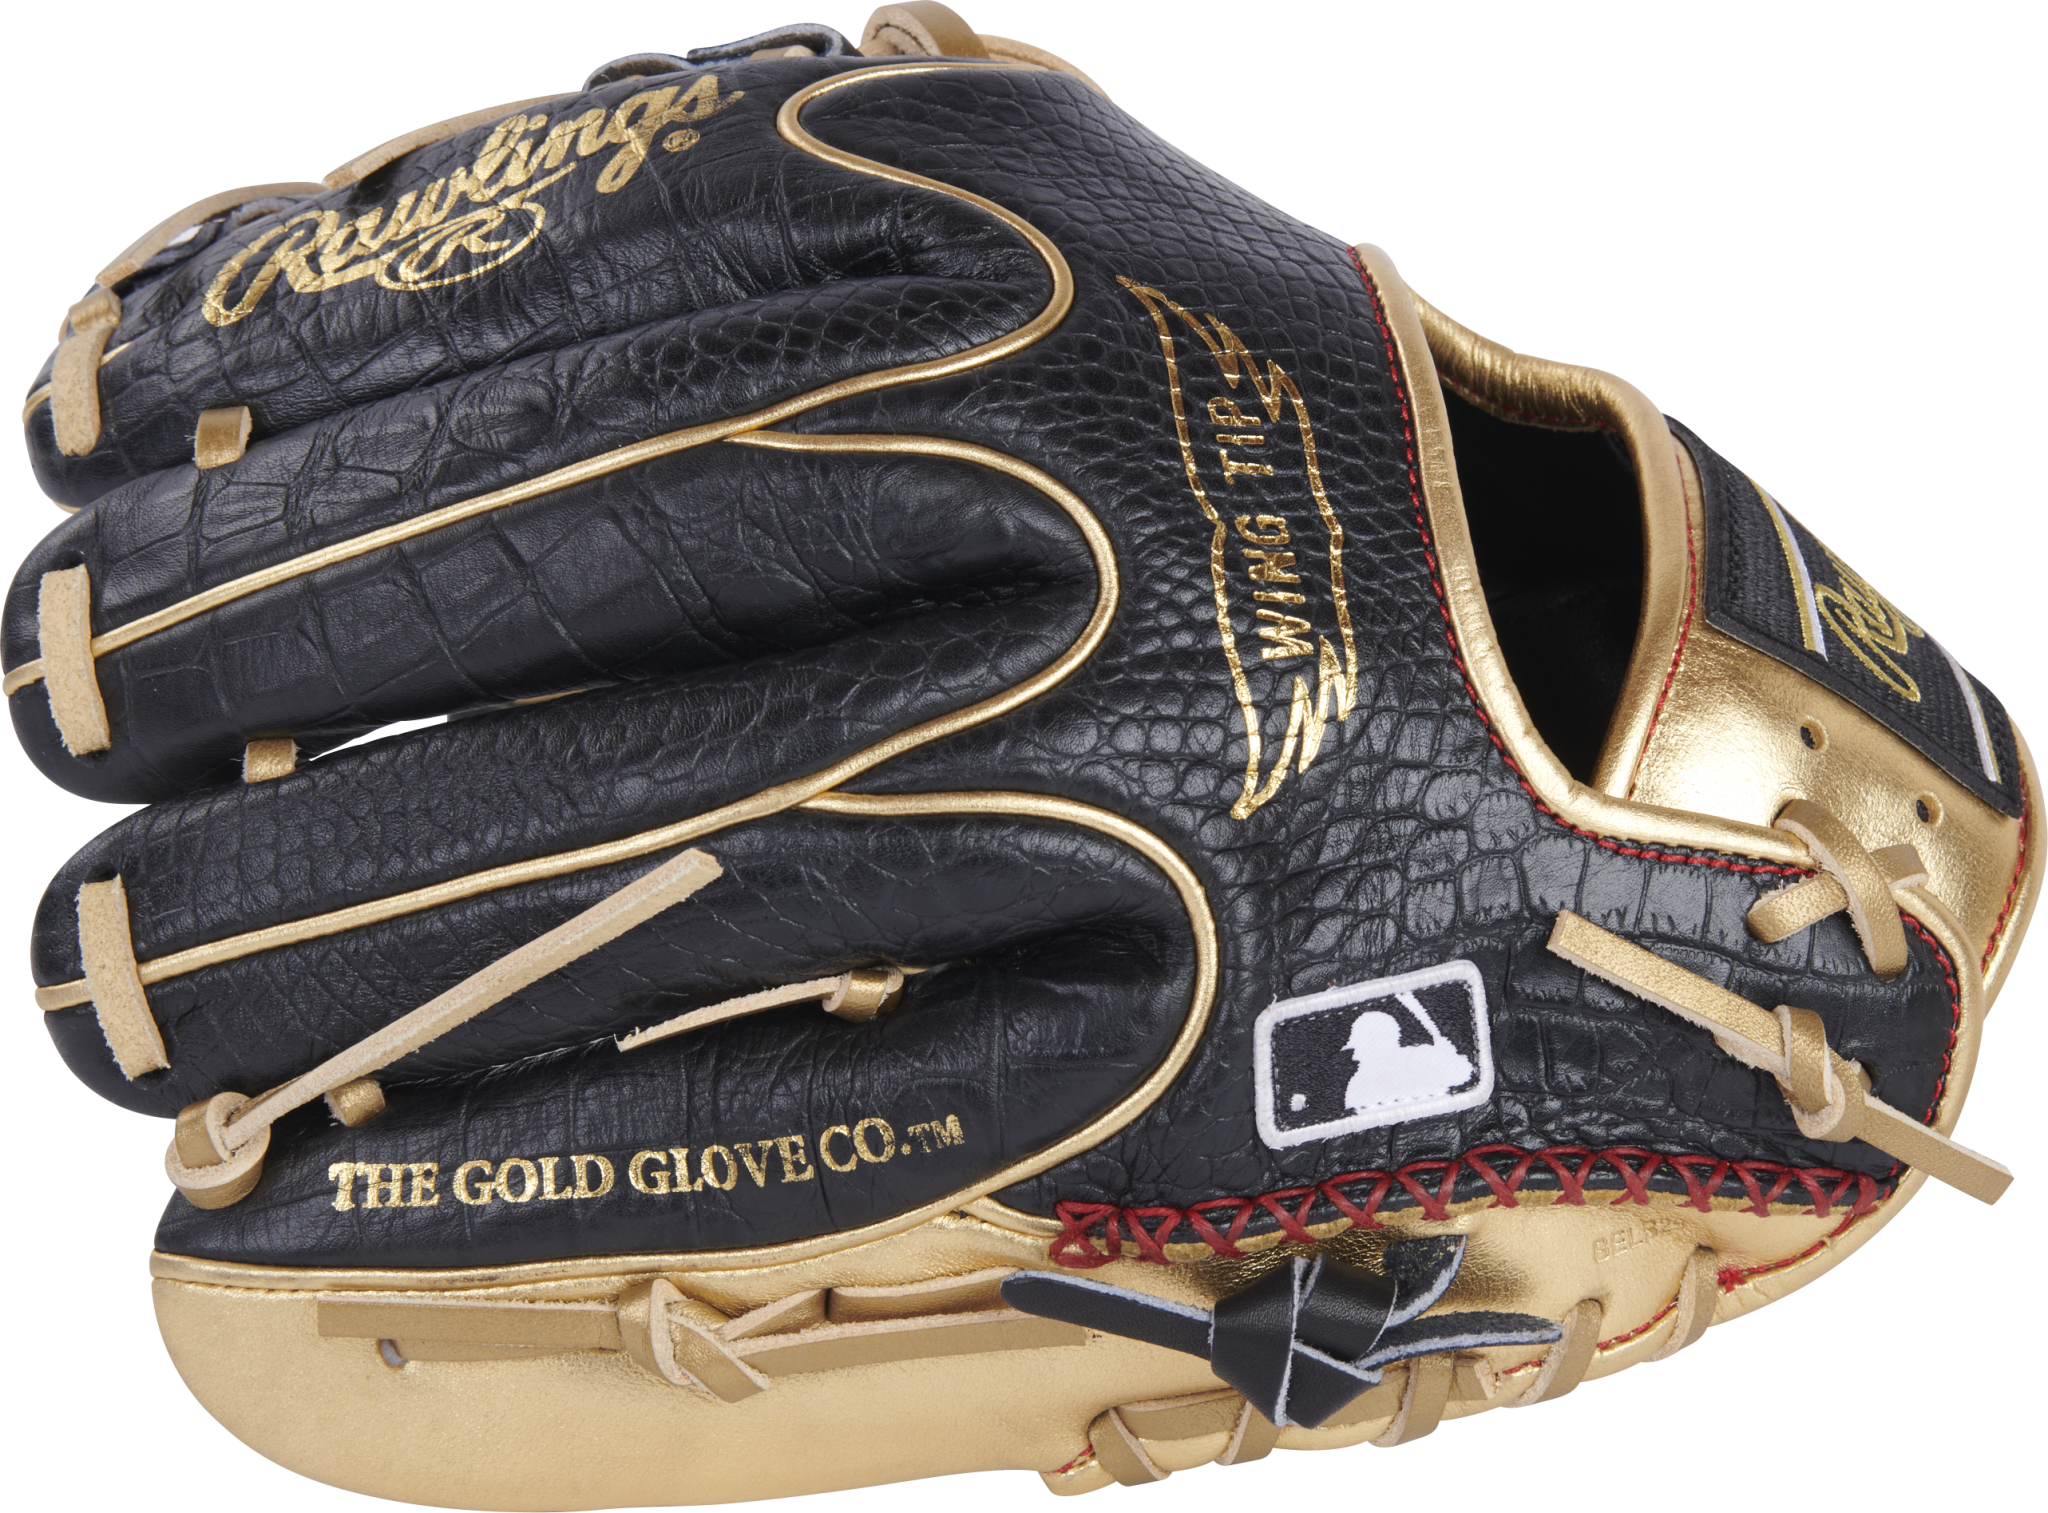 Rawlings June 2022 Gold Glove Club RGGC(GOTM) 11.5-inch Infield Heart of the Hide